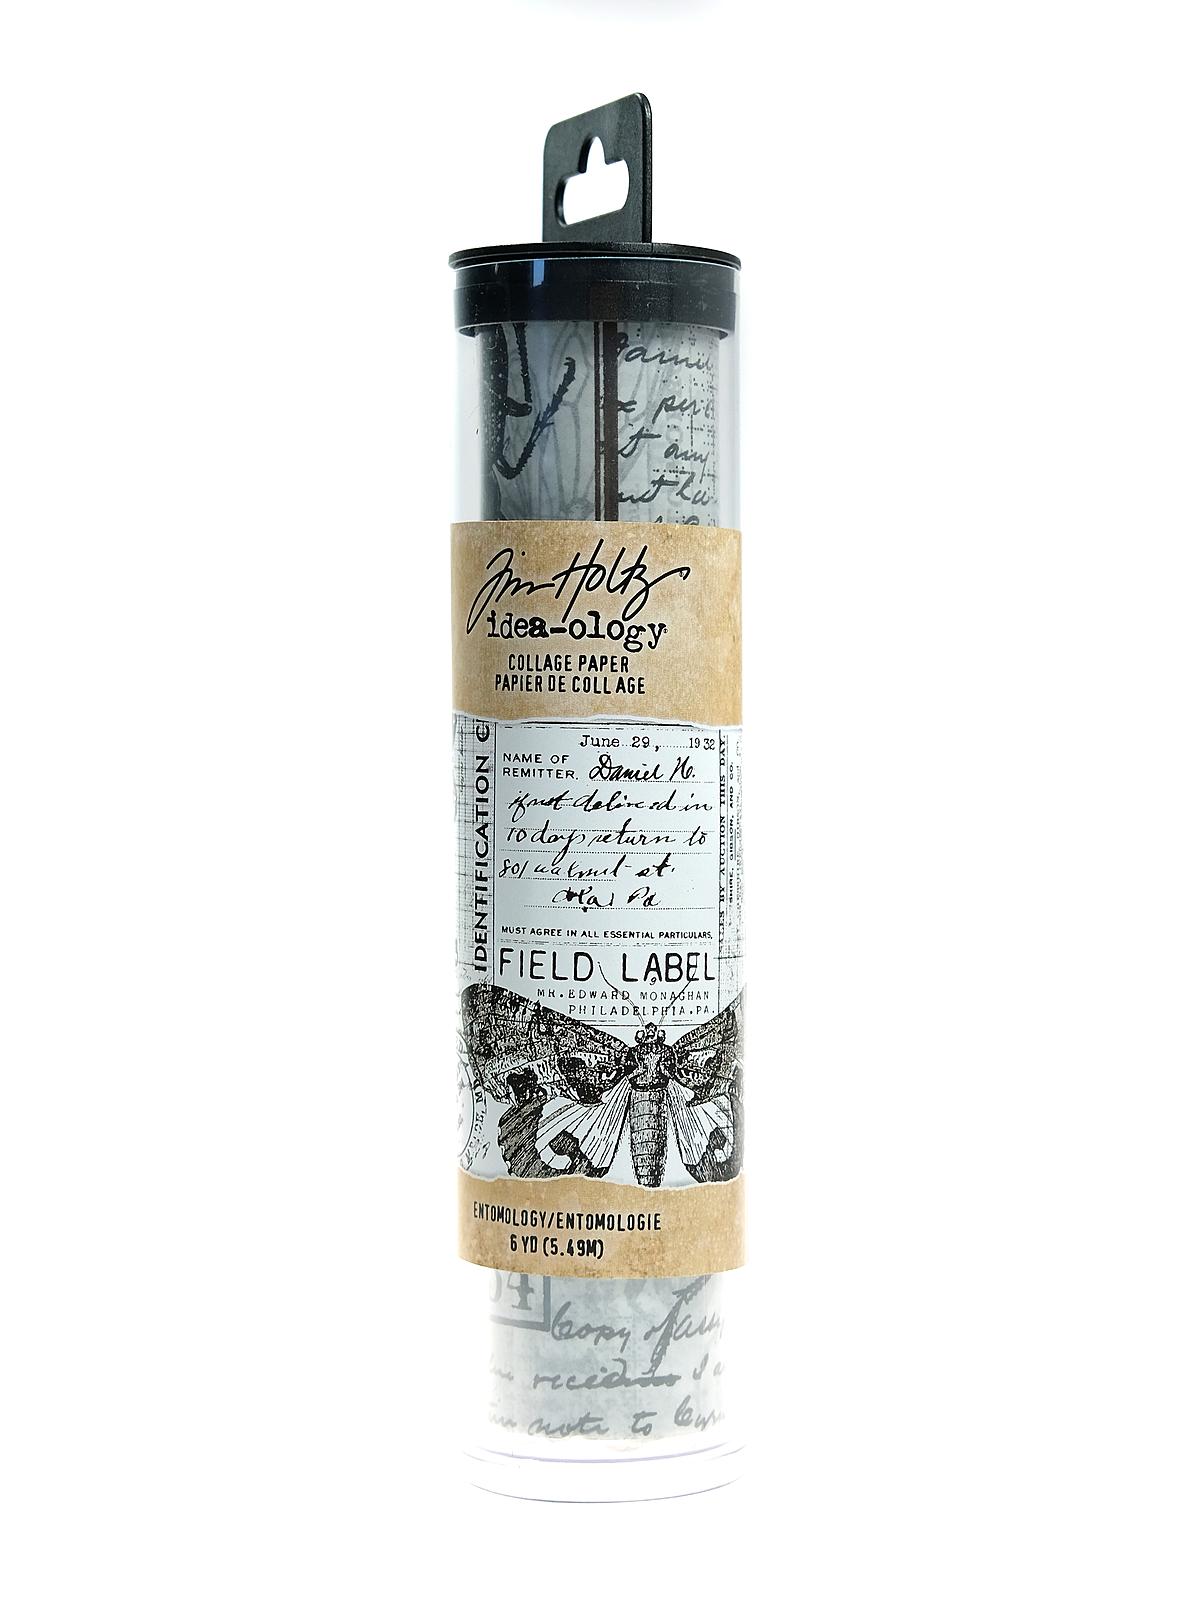 Idea-ology Paperie Collage Paper, Entomology 6 Yard Roll